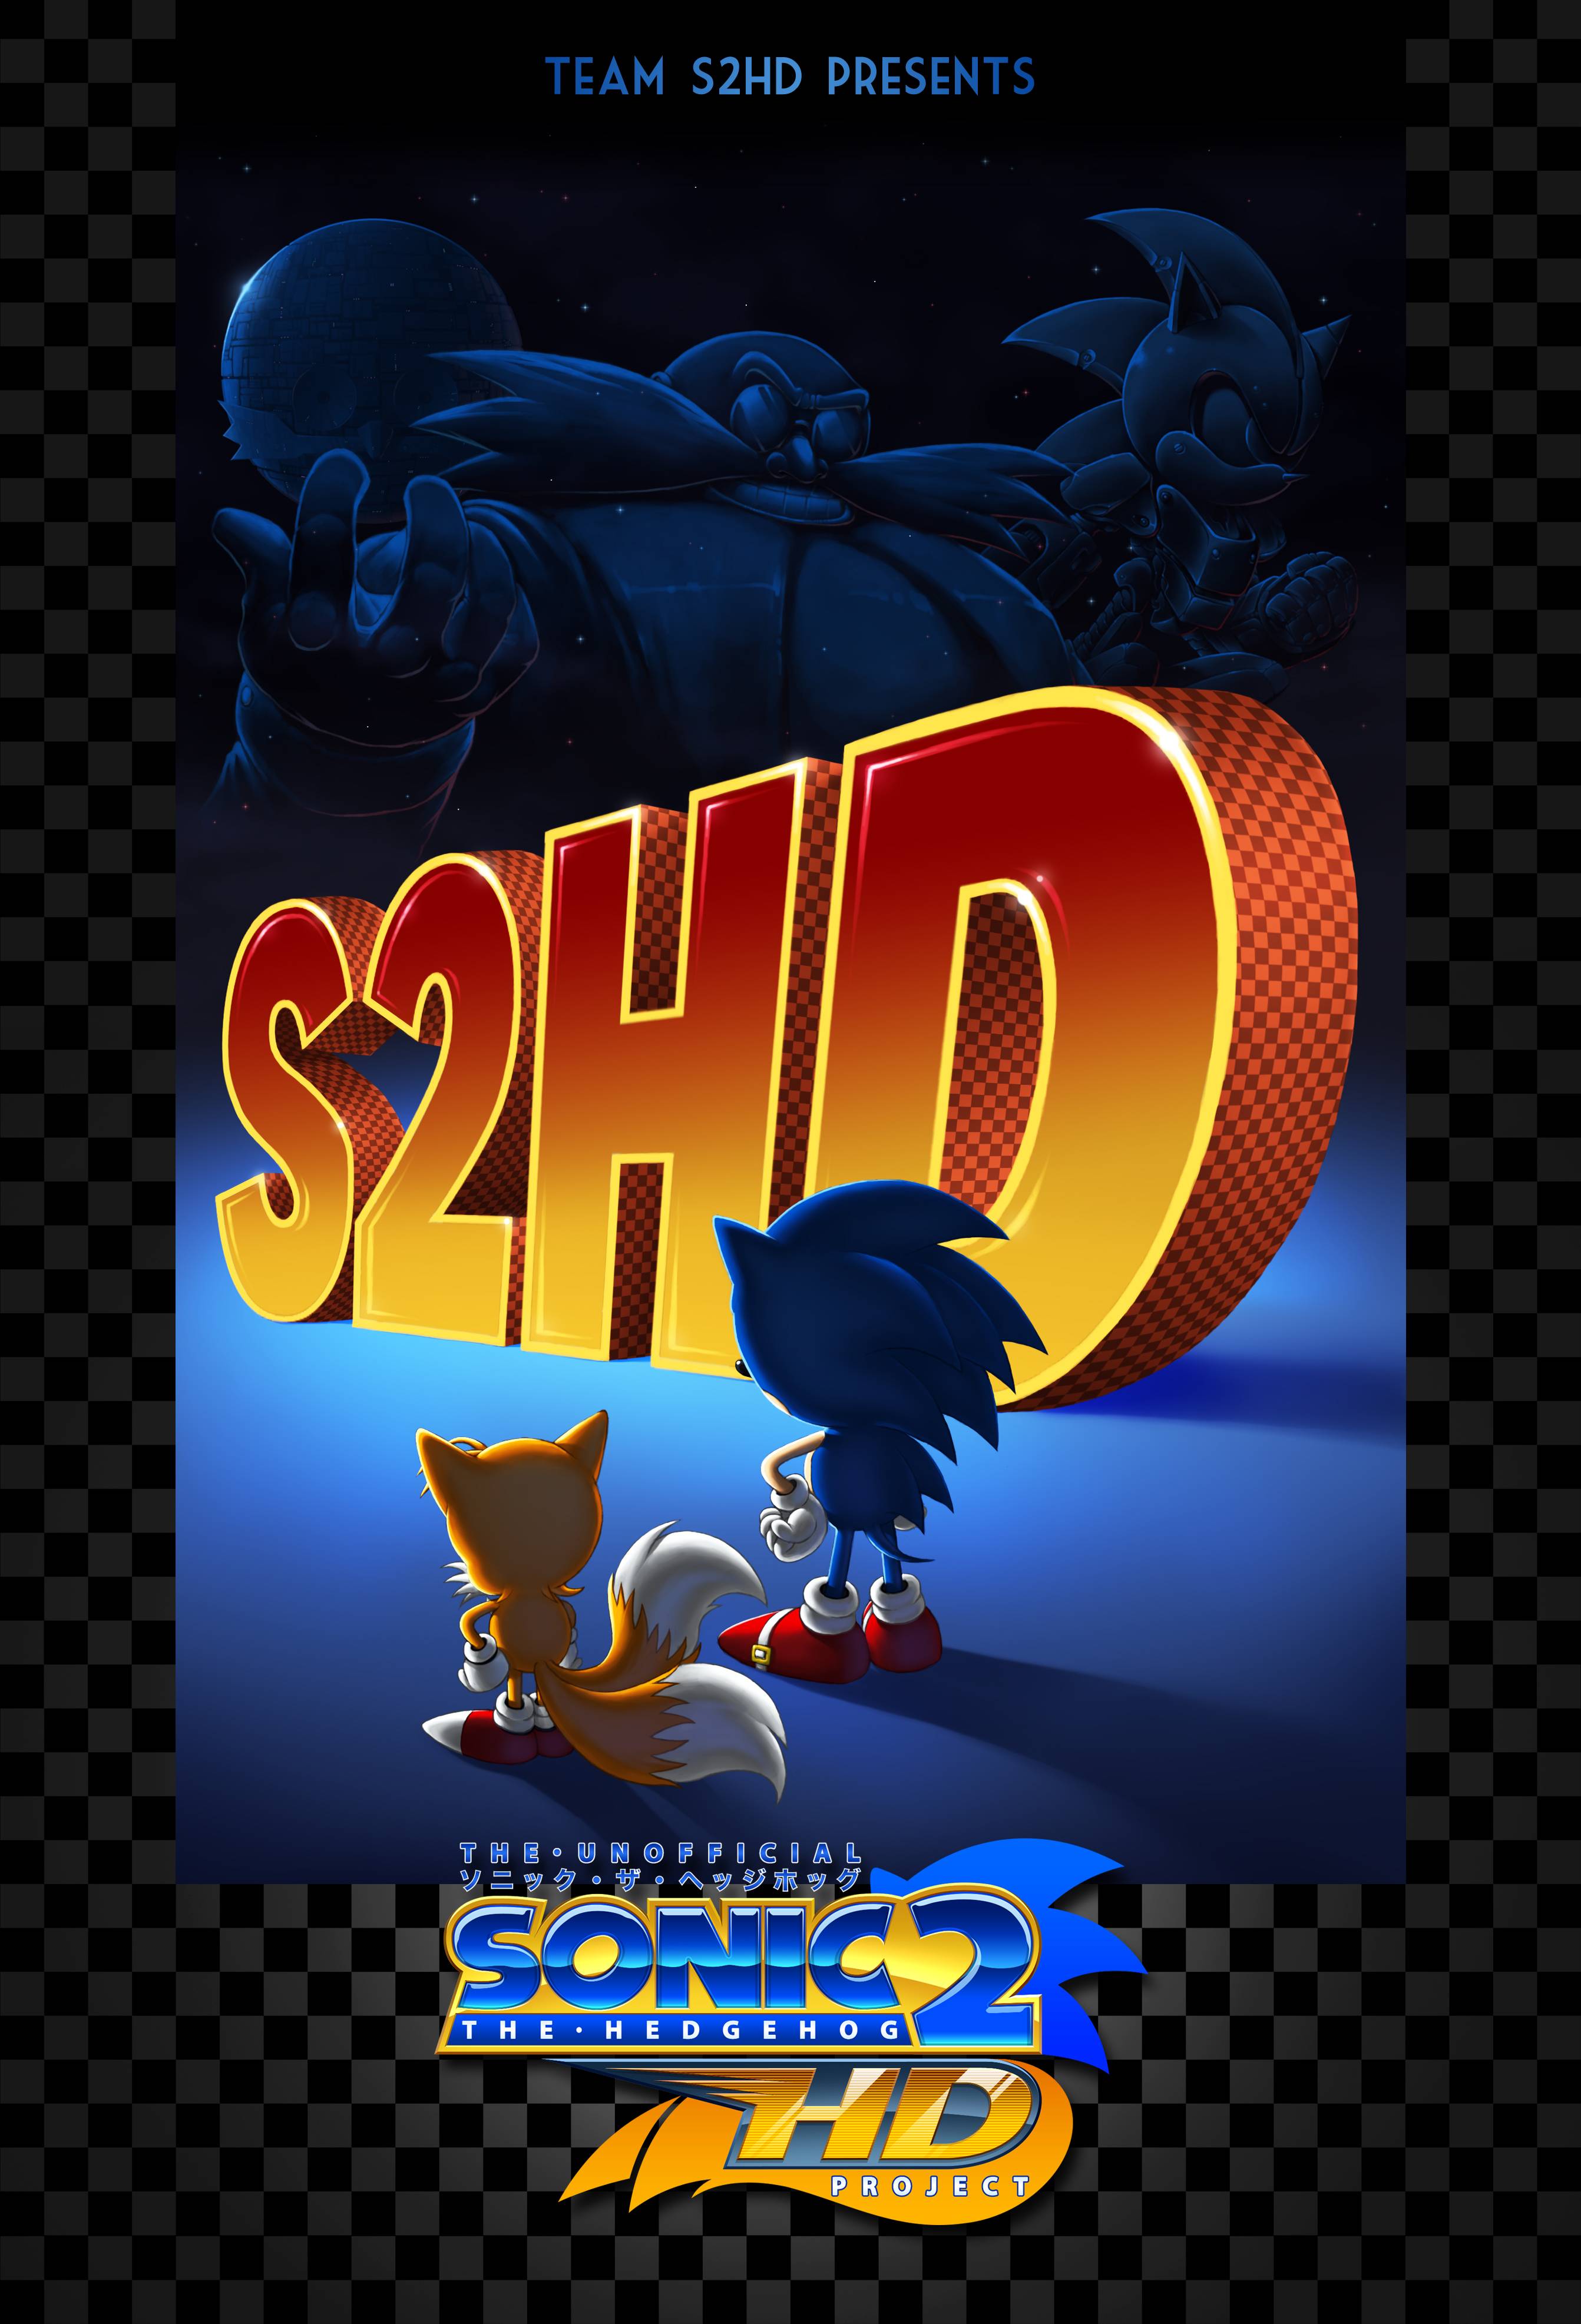 Sonic The Hedgehog 2 Wallpaper For PC by RayfiuxArt on DeviantArt